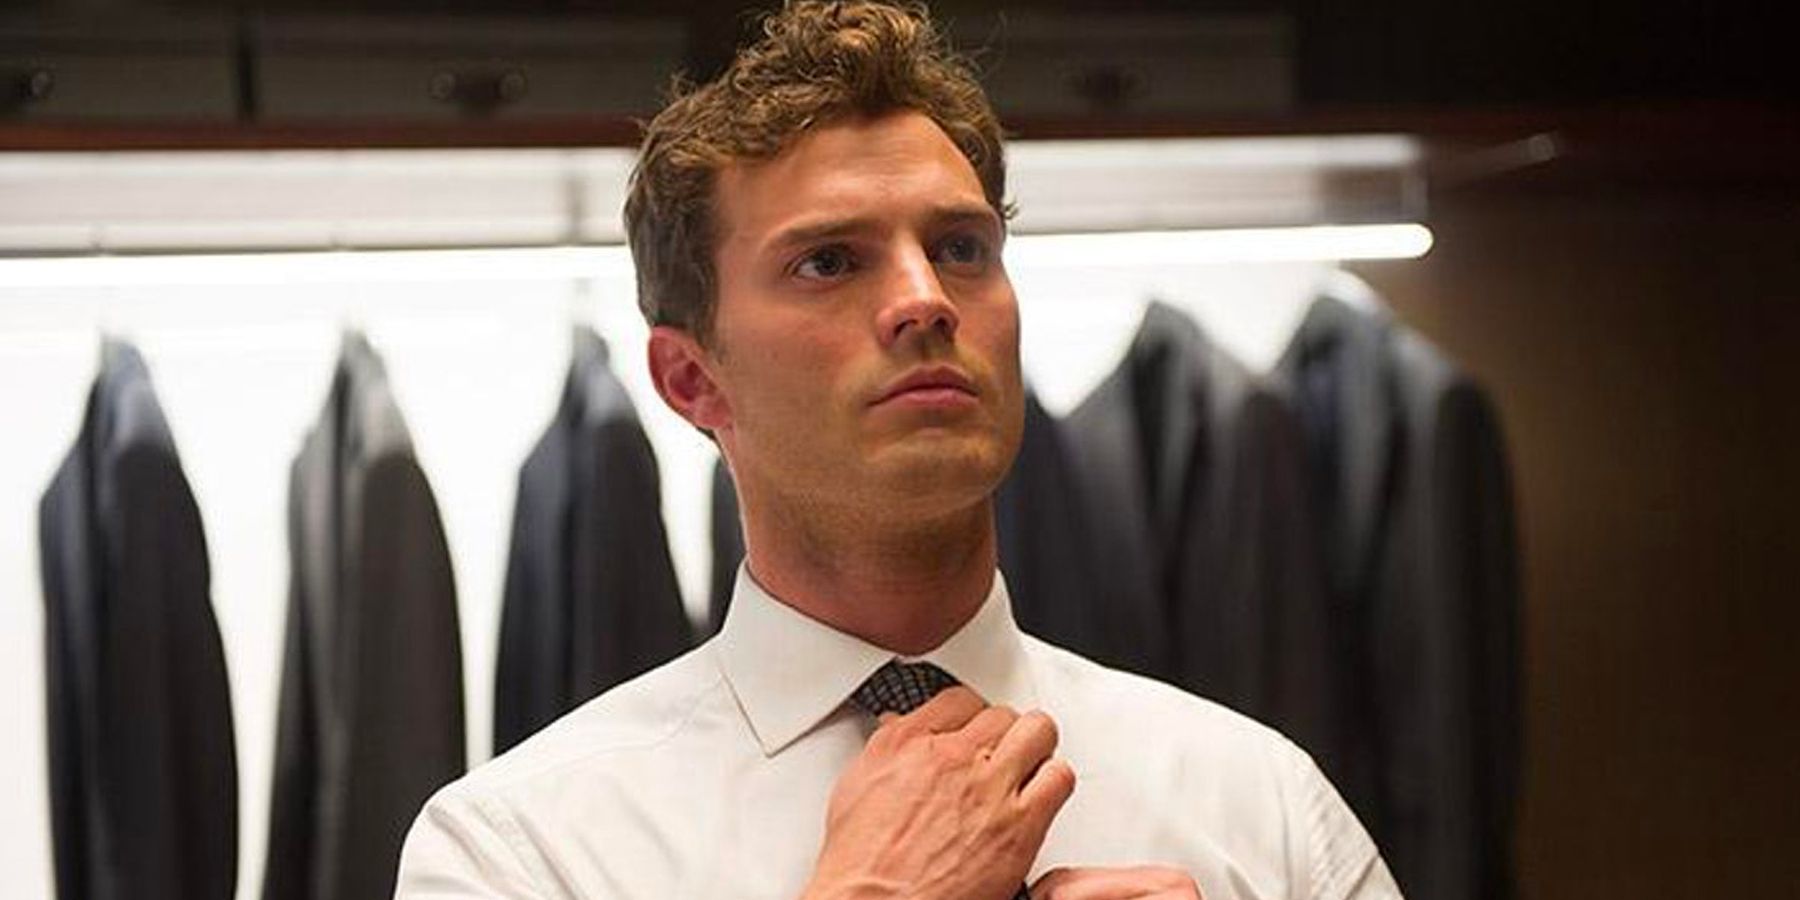 Jamie Dornan's Fifty Shades of Grey, Game of Thrones and The Avengers in  bid for People's Choice Awards